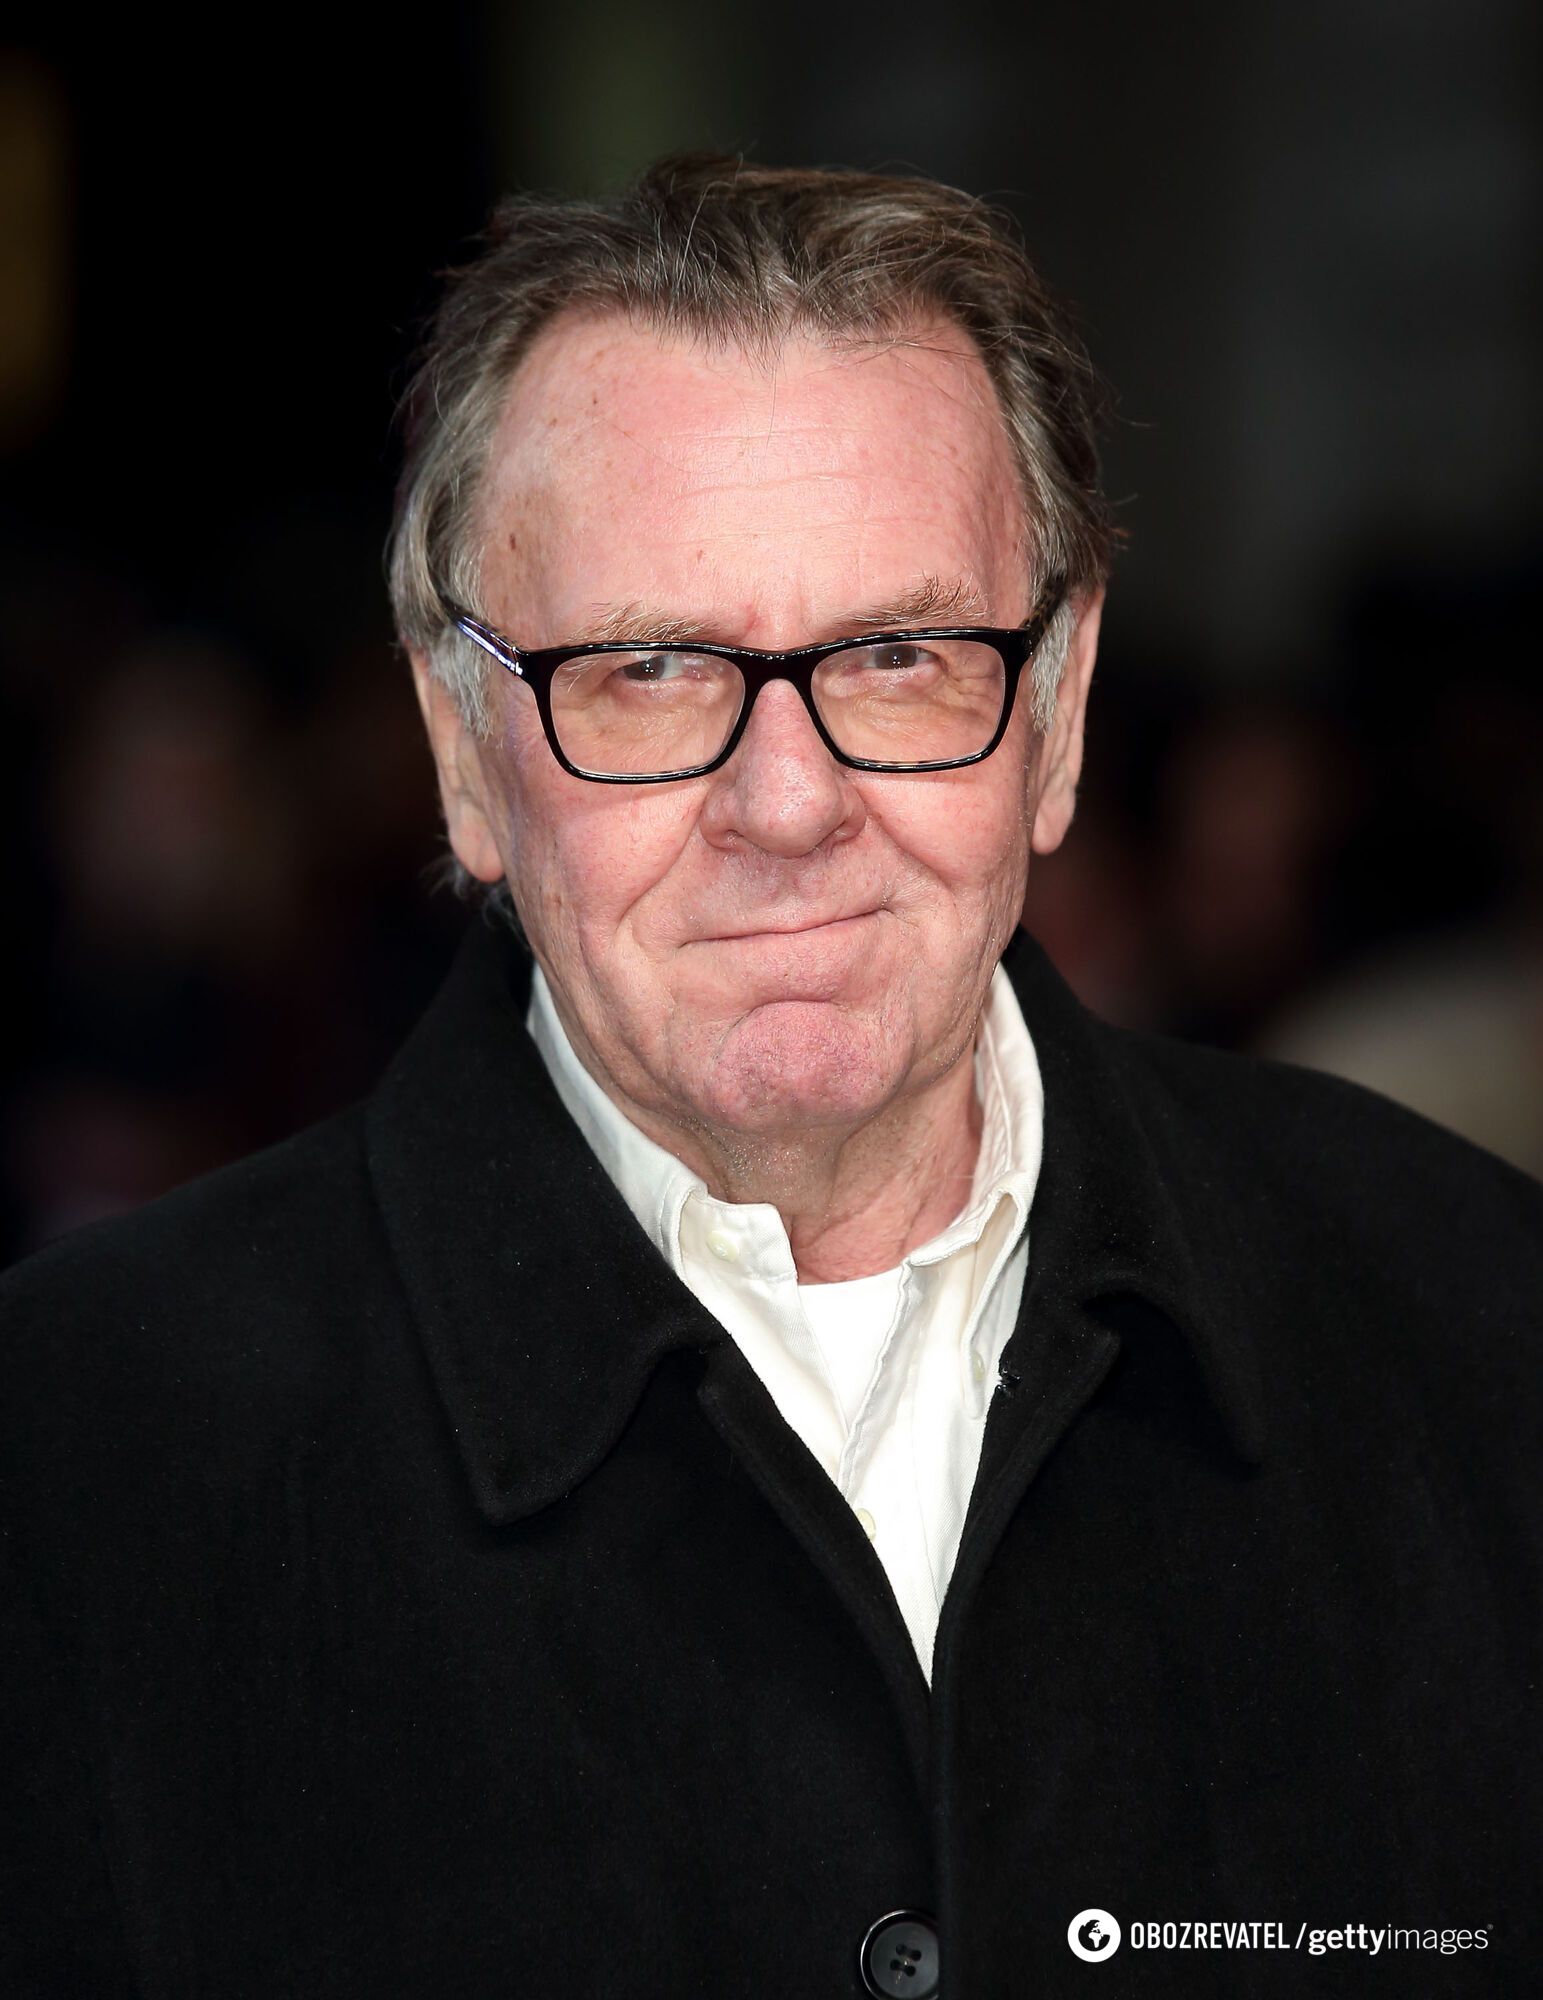 Two losses at once: The Lone Ranger star Tom Wilkinson and The Sopranos actor Richard Romanus have died